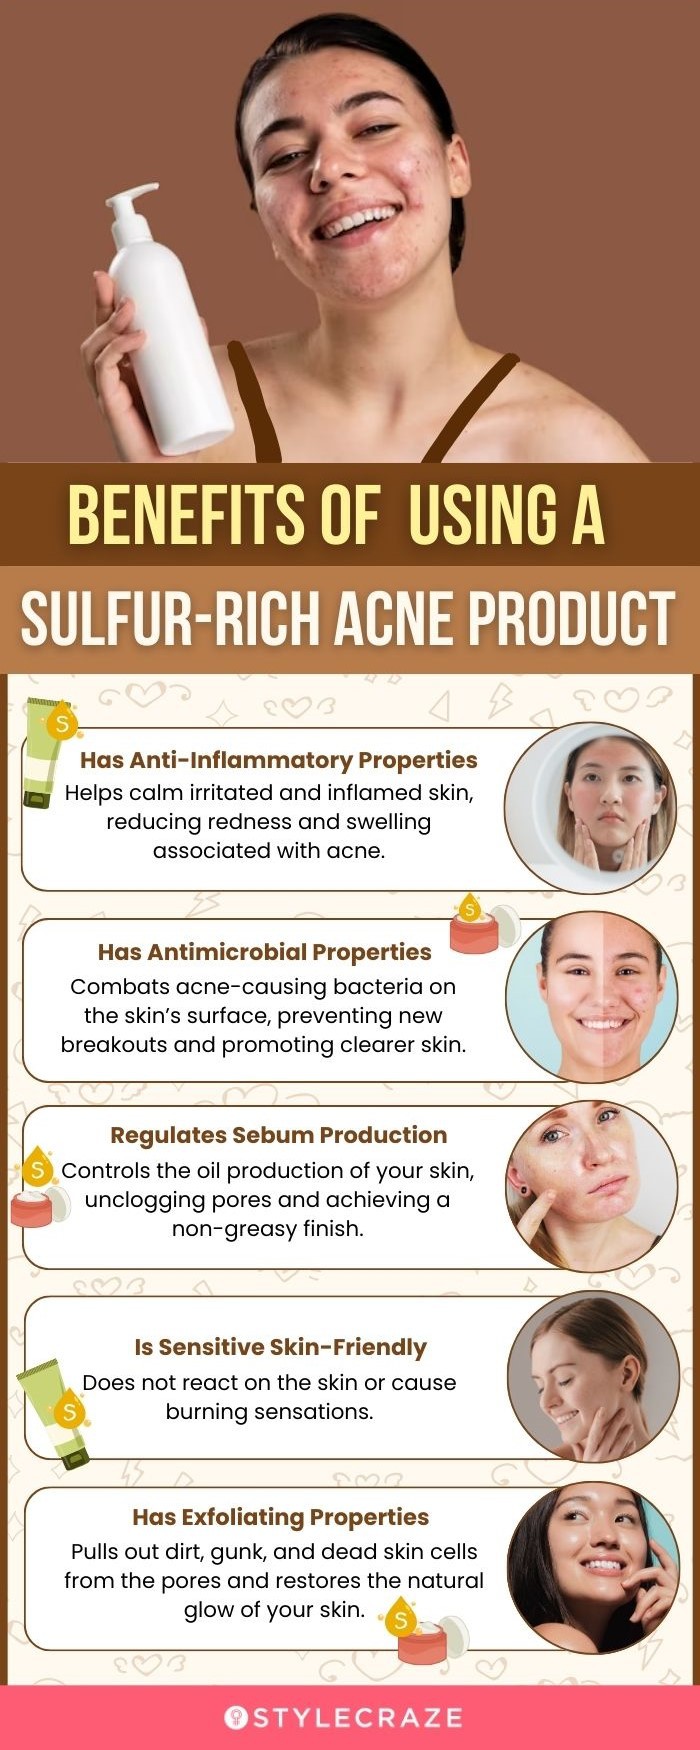 Benefits Of Using A Sulfur-Rich Acne Product (infographic)